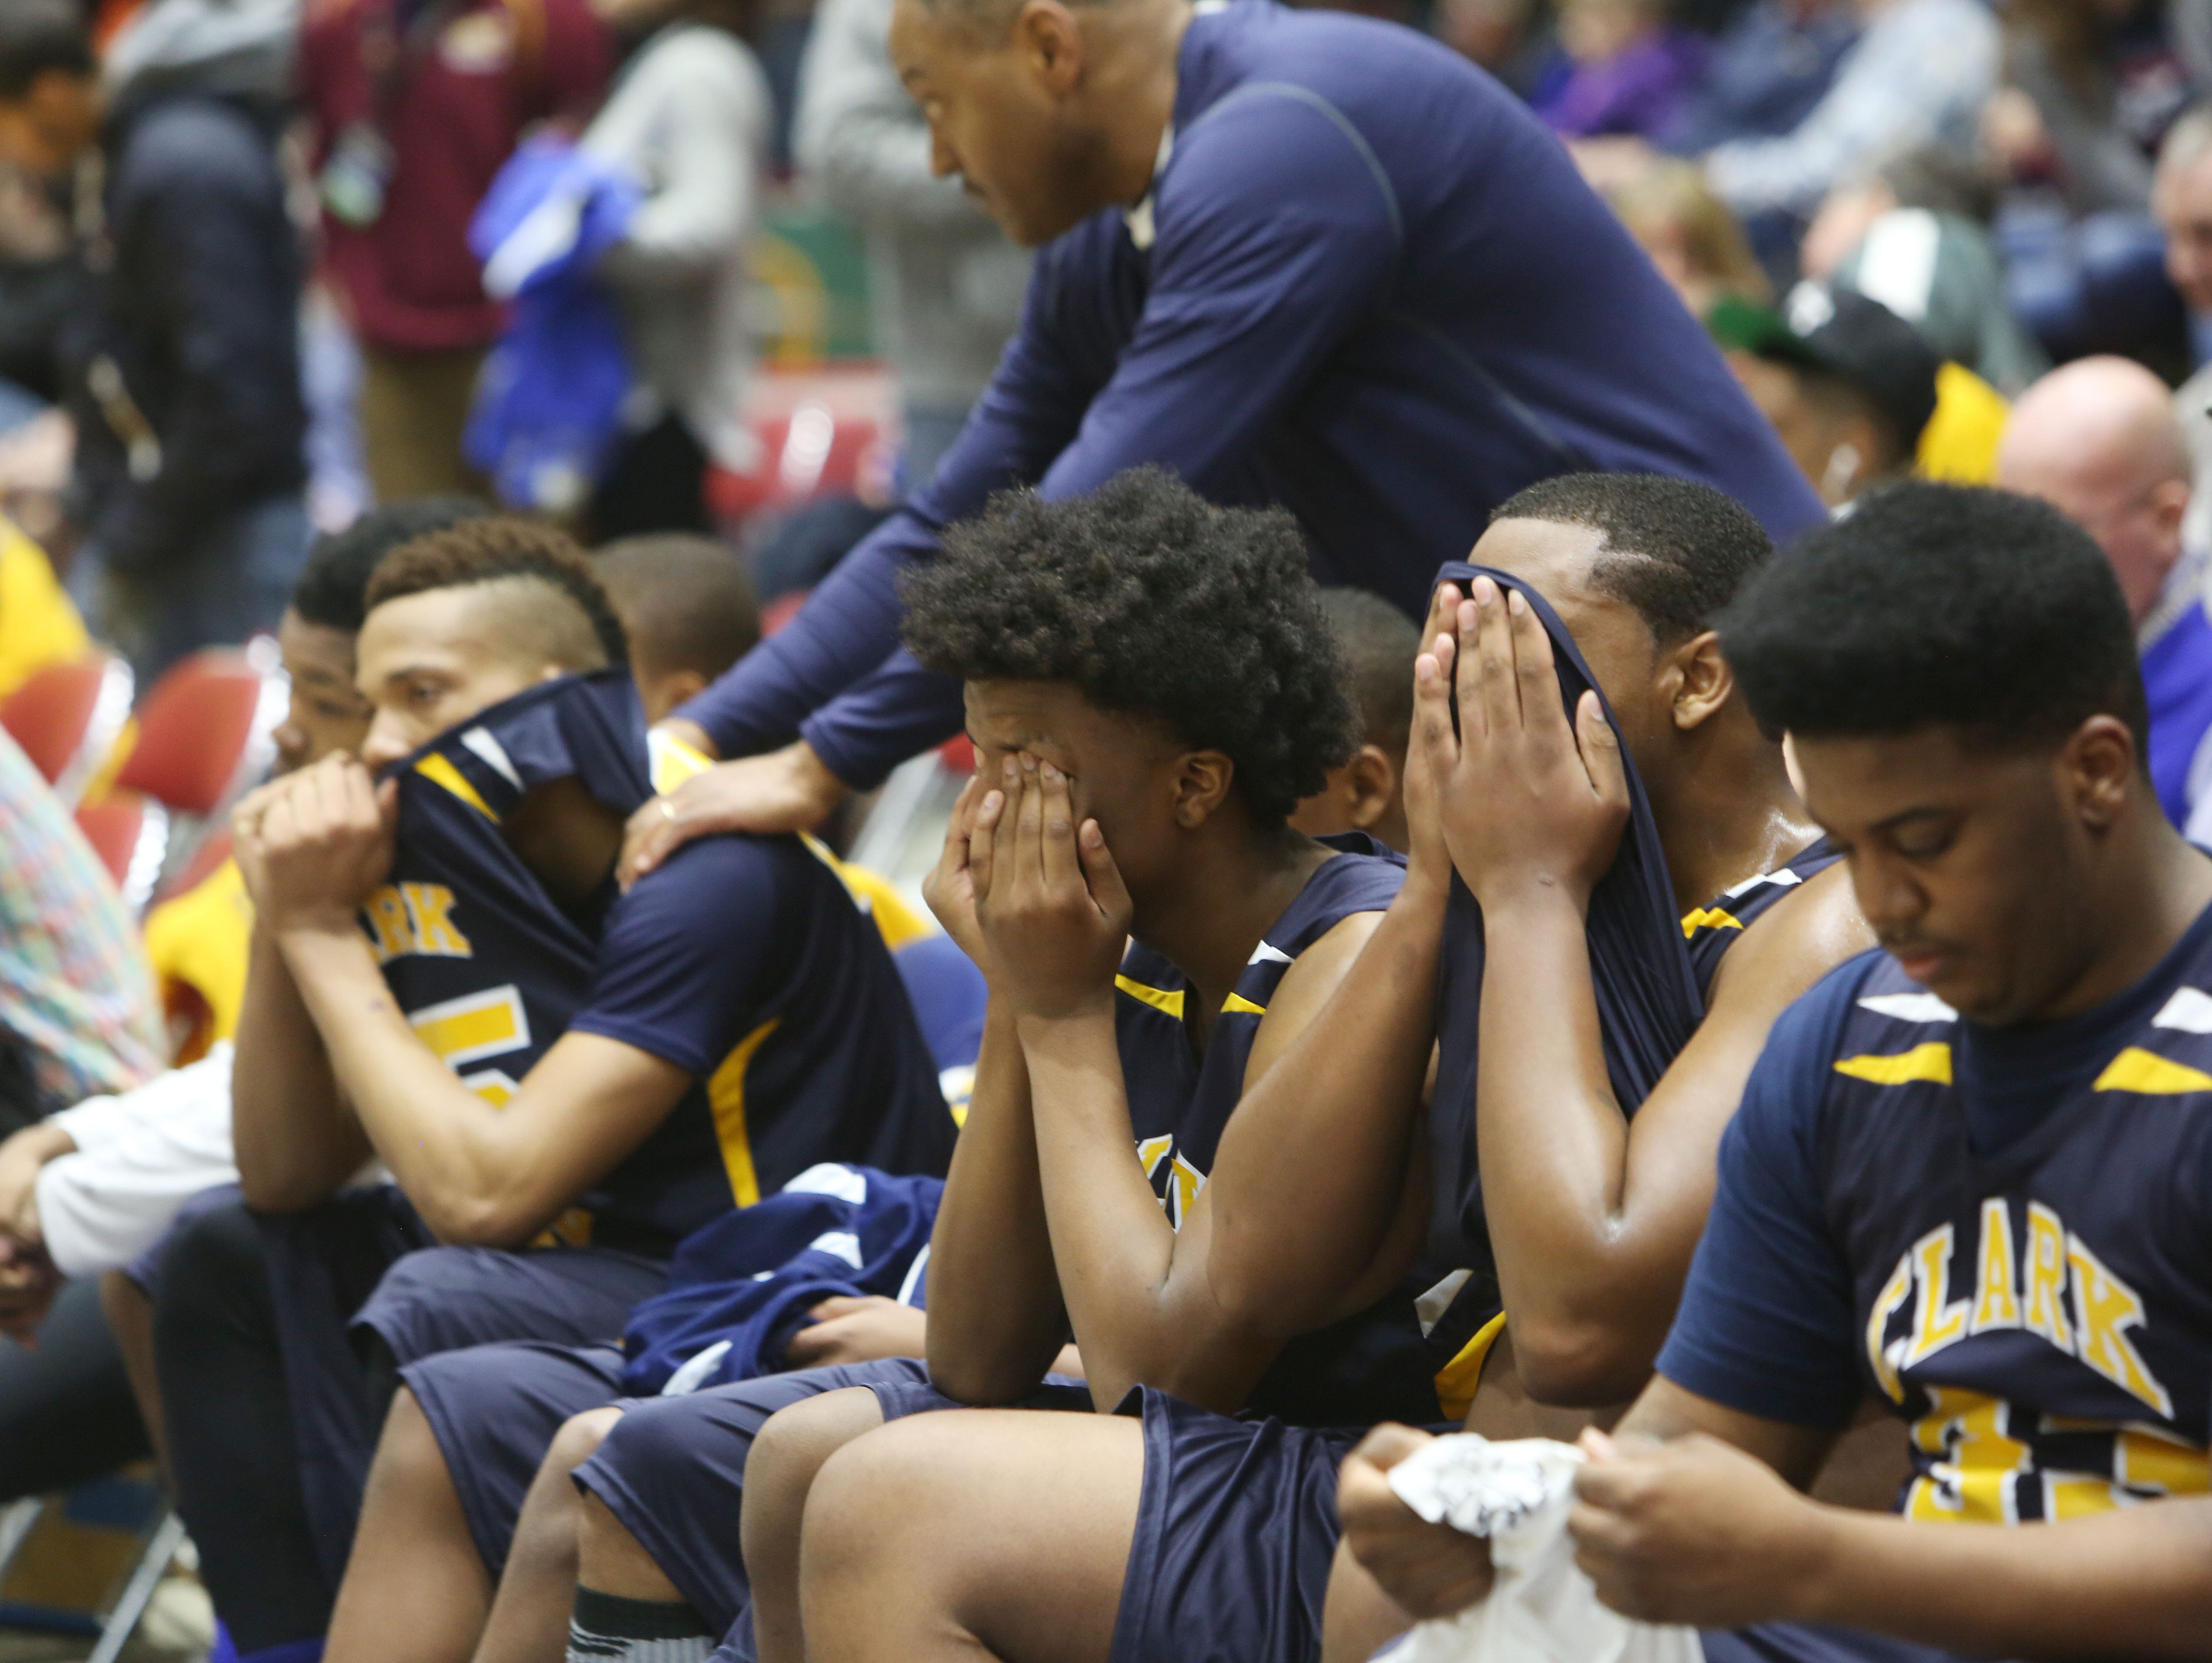 Clark Academy players watch from the bench as their season comes to an end against Oriskany in the boys Class D semifinal at the Glens Falls Civic Center March 11, 2016. Oriskany won the game 59-40.